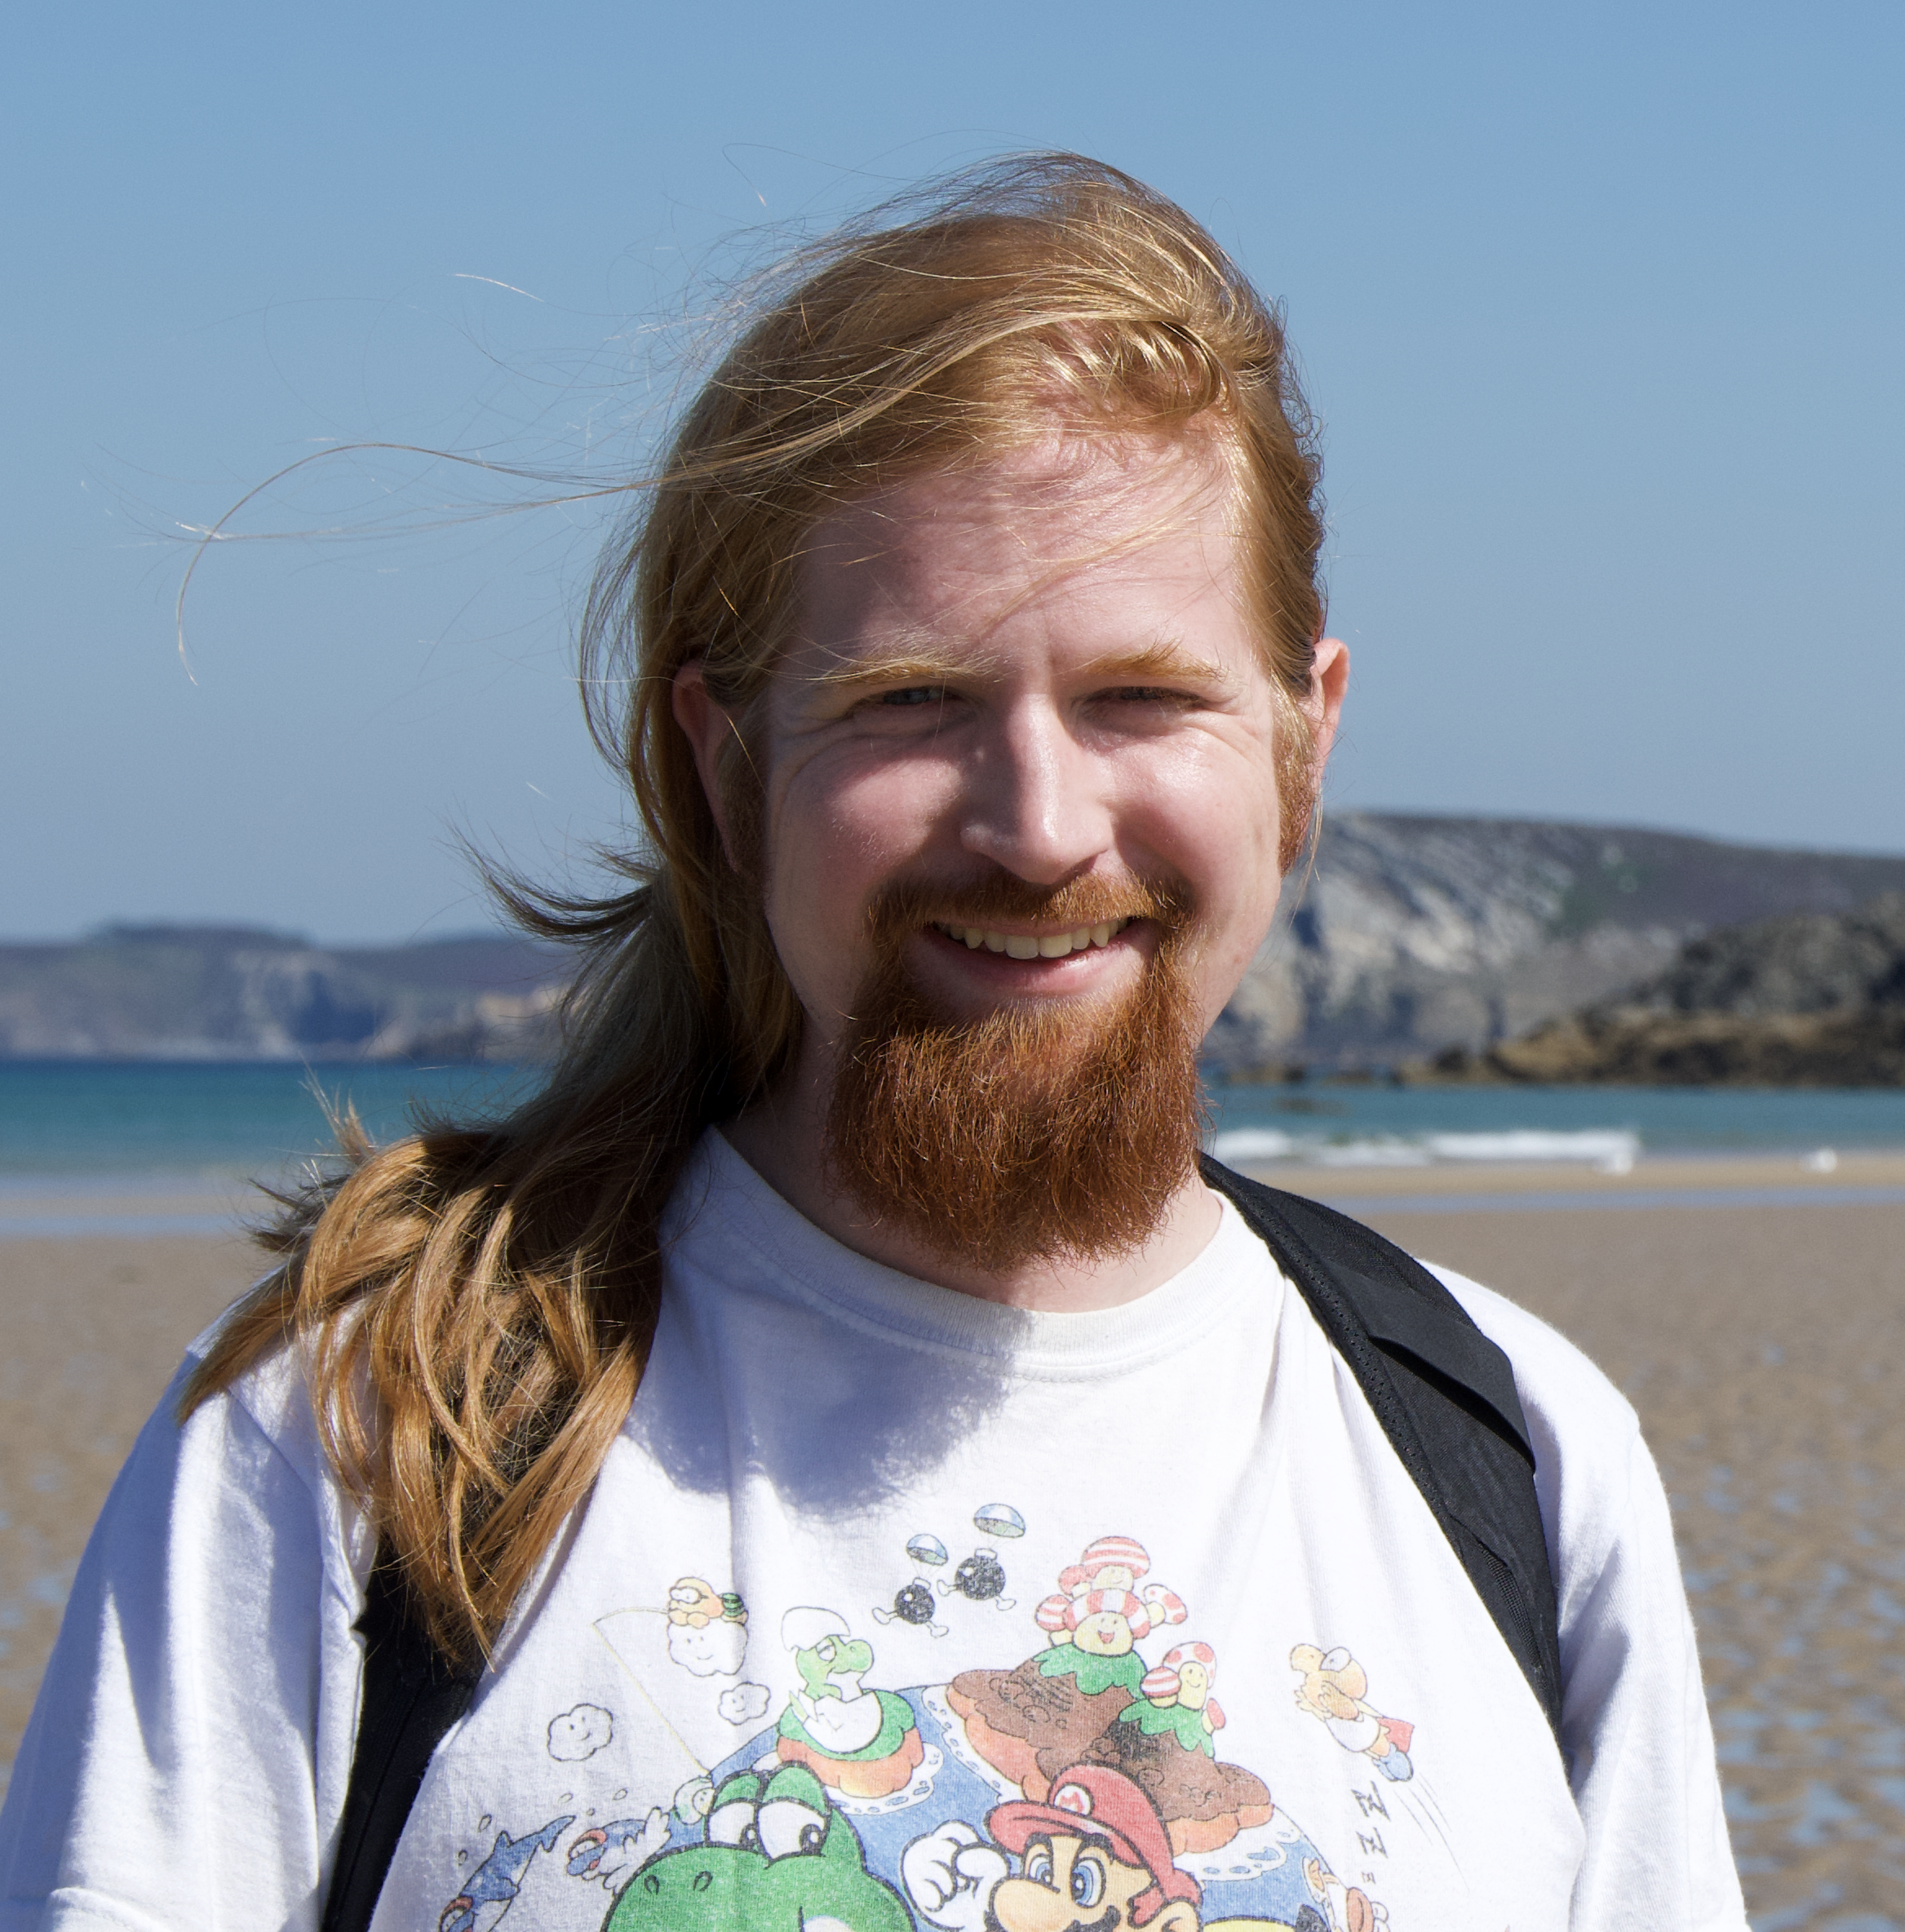 Leif's profile photo. He has long red hair and a big bushy beard, and is smiling into the camera. Behind him, out of focus, is a beach and some mountains, and on his white t-shirt you can see a glimpse of a variety of Nintendo characters.